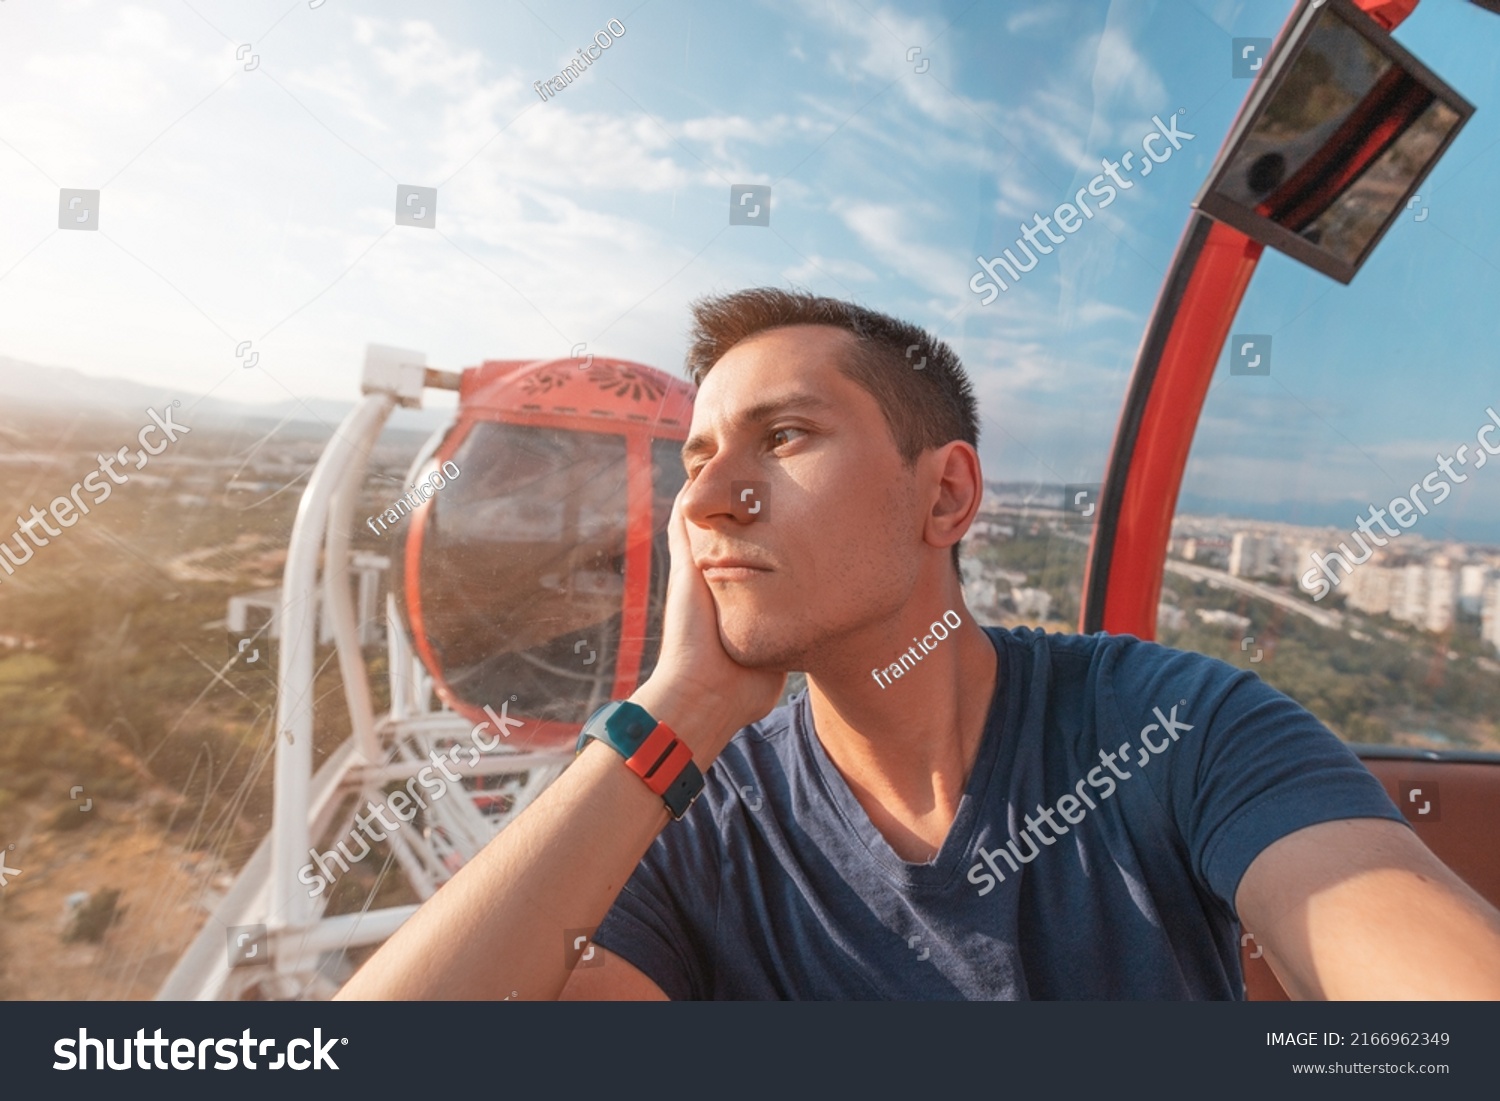 Depressed and sad young man taking selfie while riding ferris wheel in amusement luna park. Loneliness and depression concept #2166962349